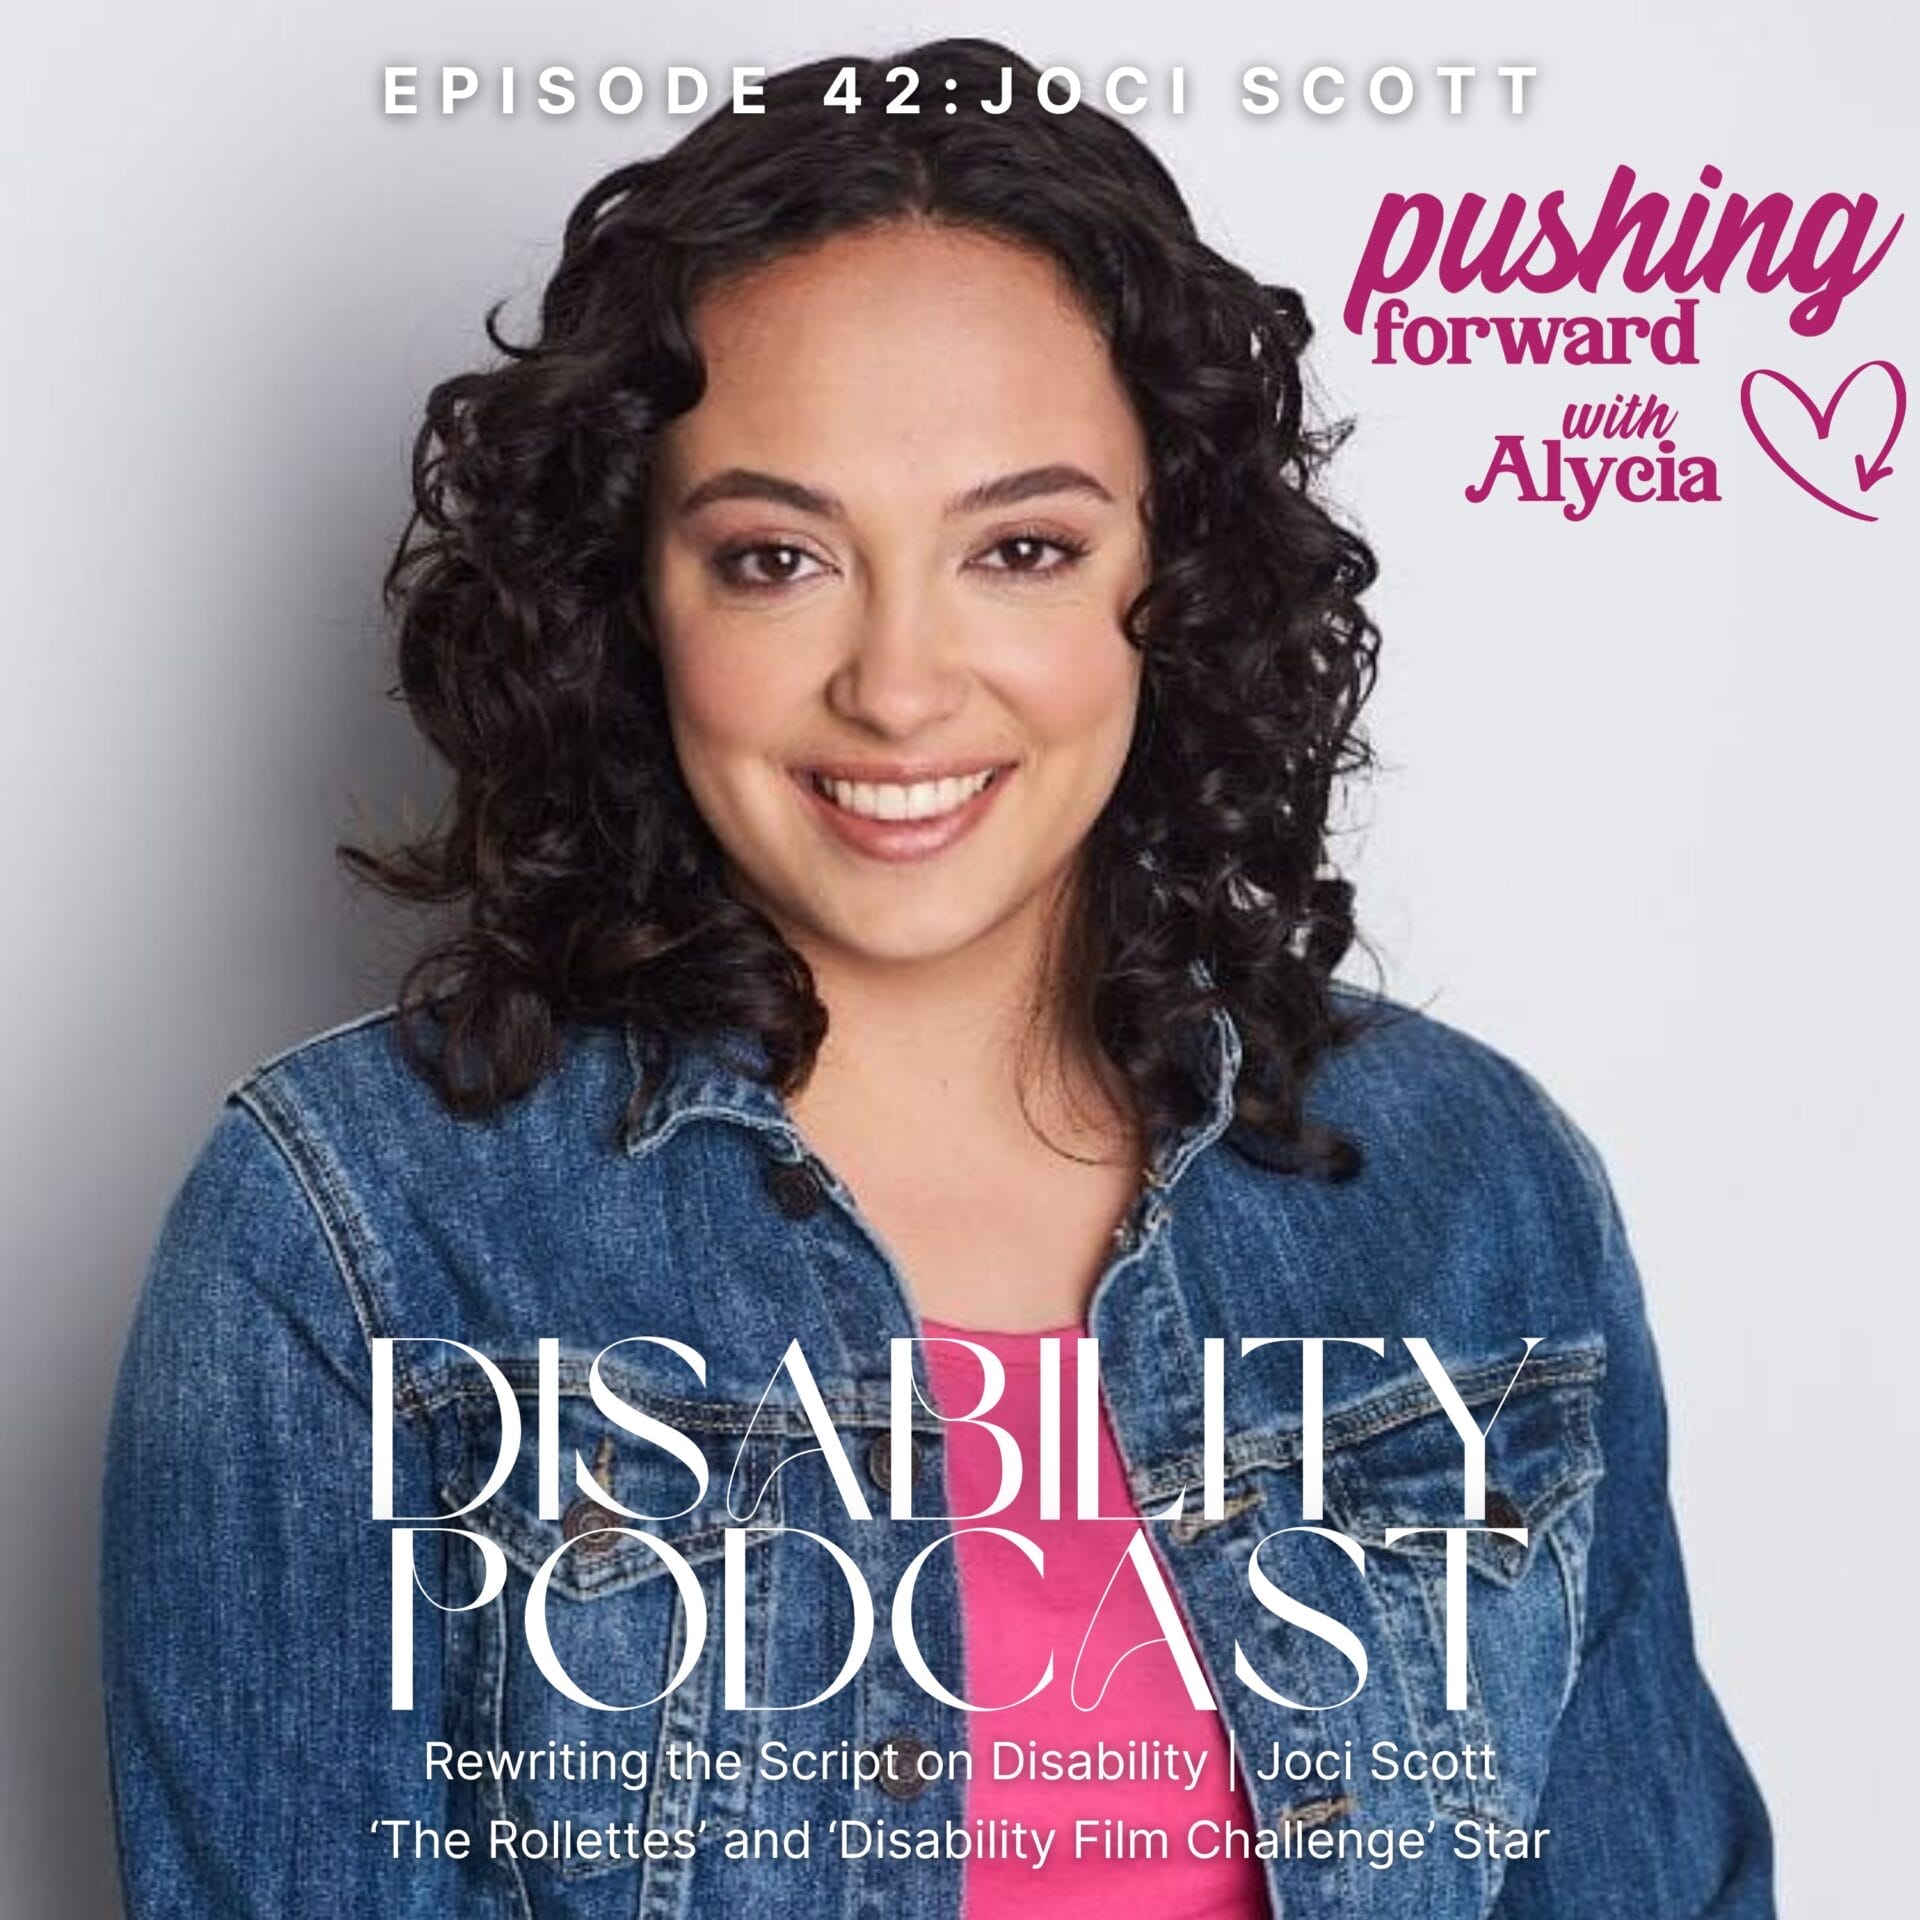 joci scott rewriting the script on disability rollettes and disability film challenge star episode forty two pushing forward with alycia